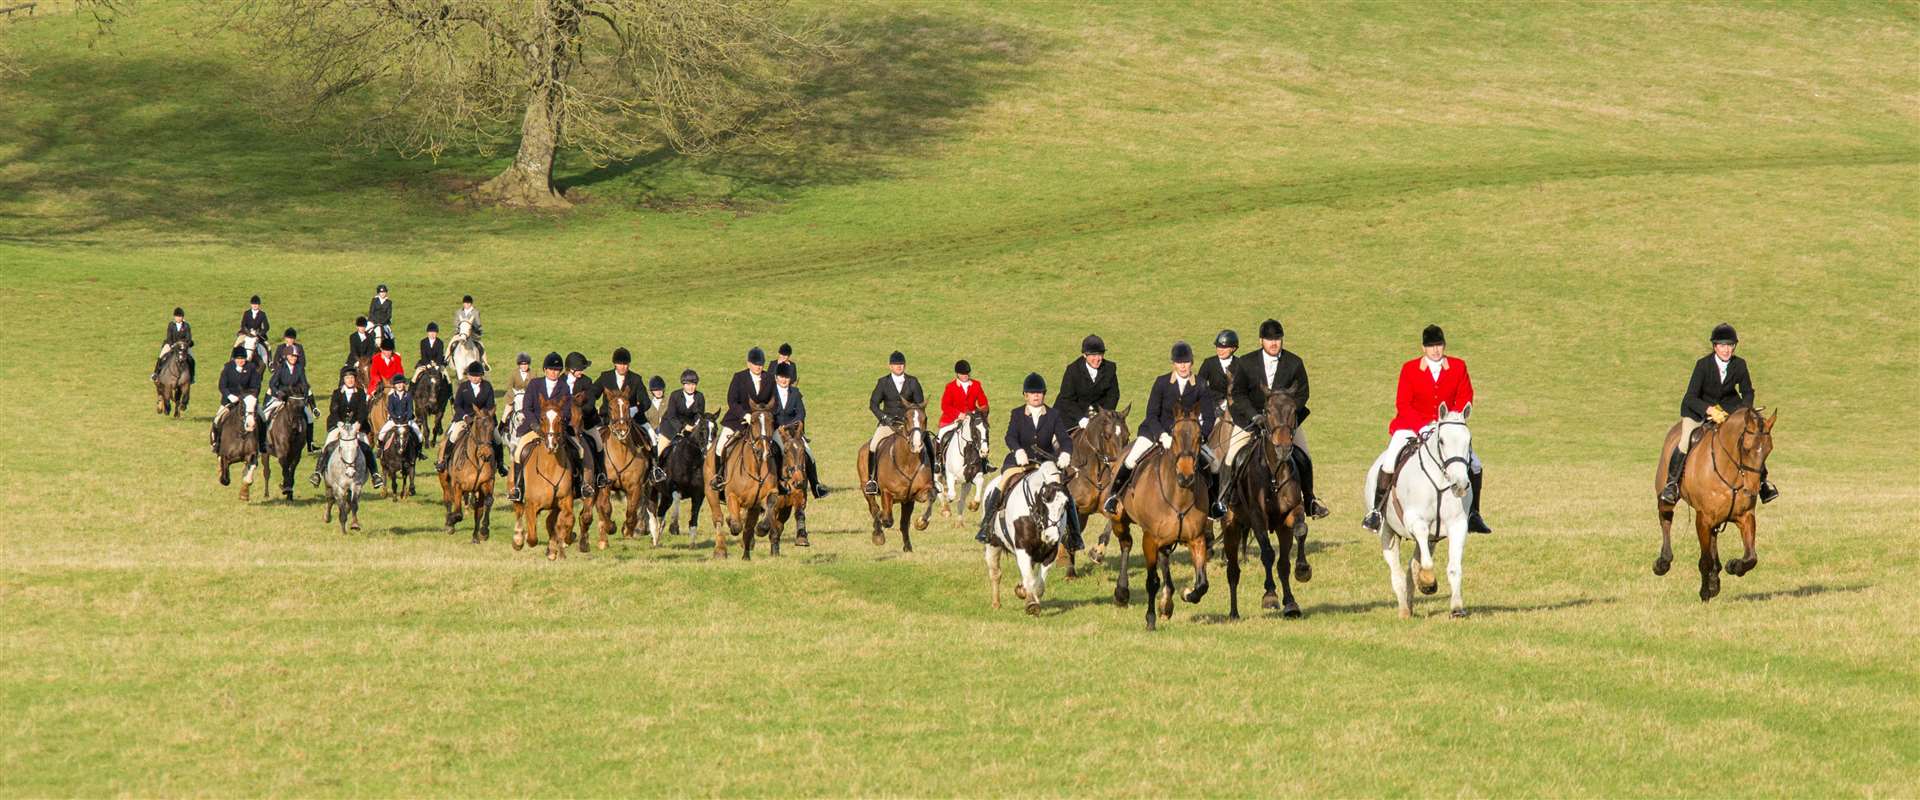 The hunt sets off into the countryside following a scented trail. Photo: The Gather Photography.